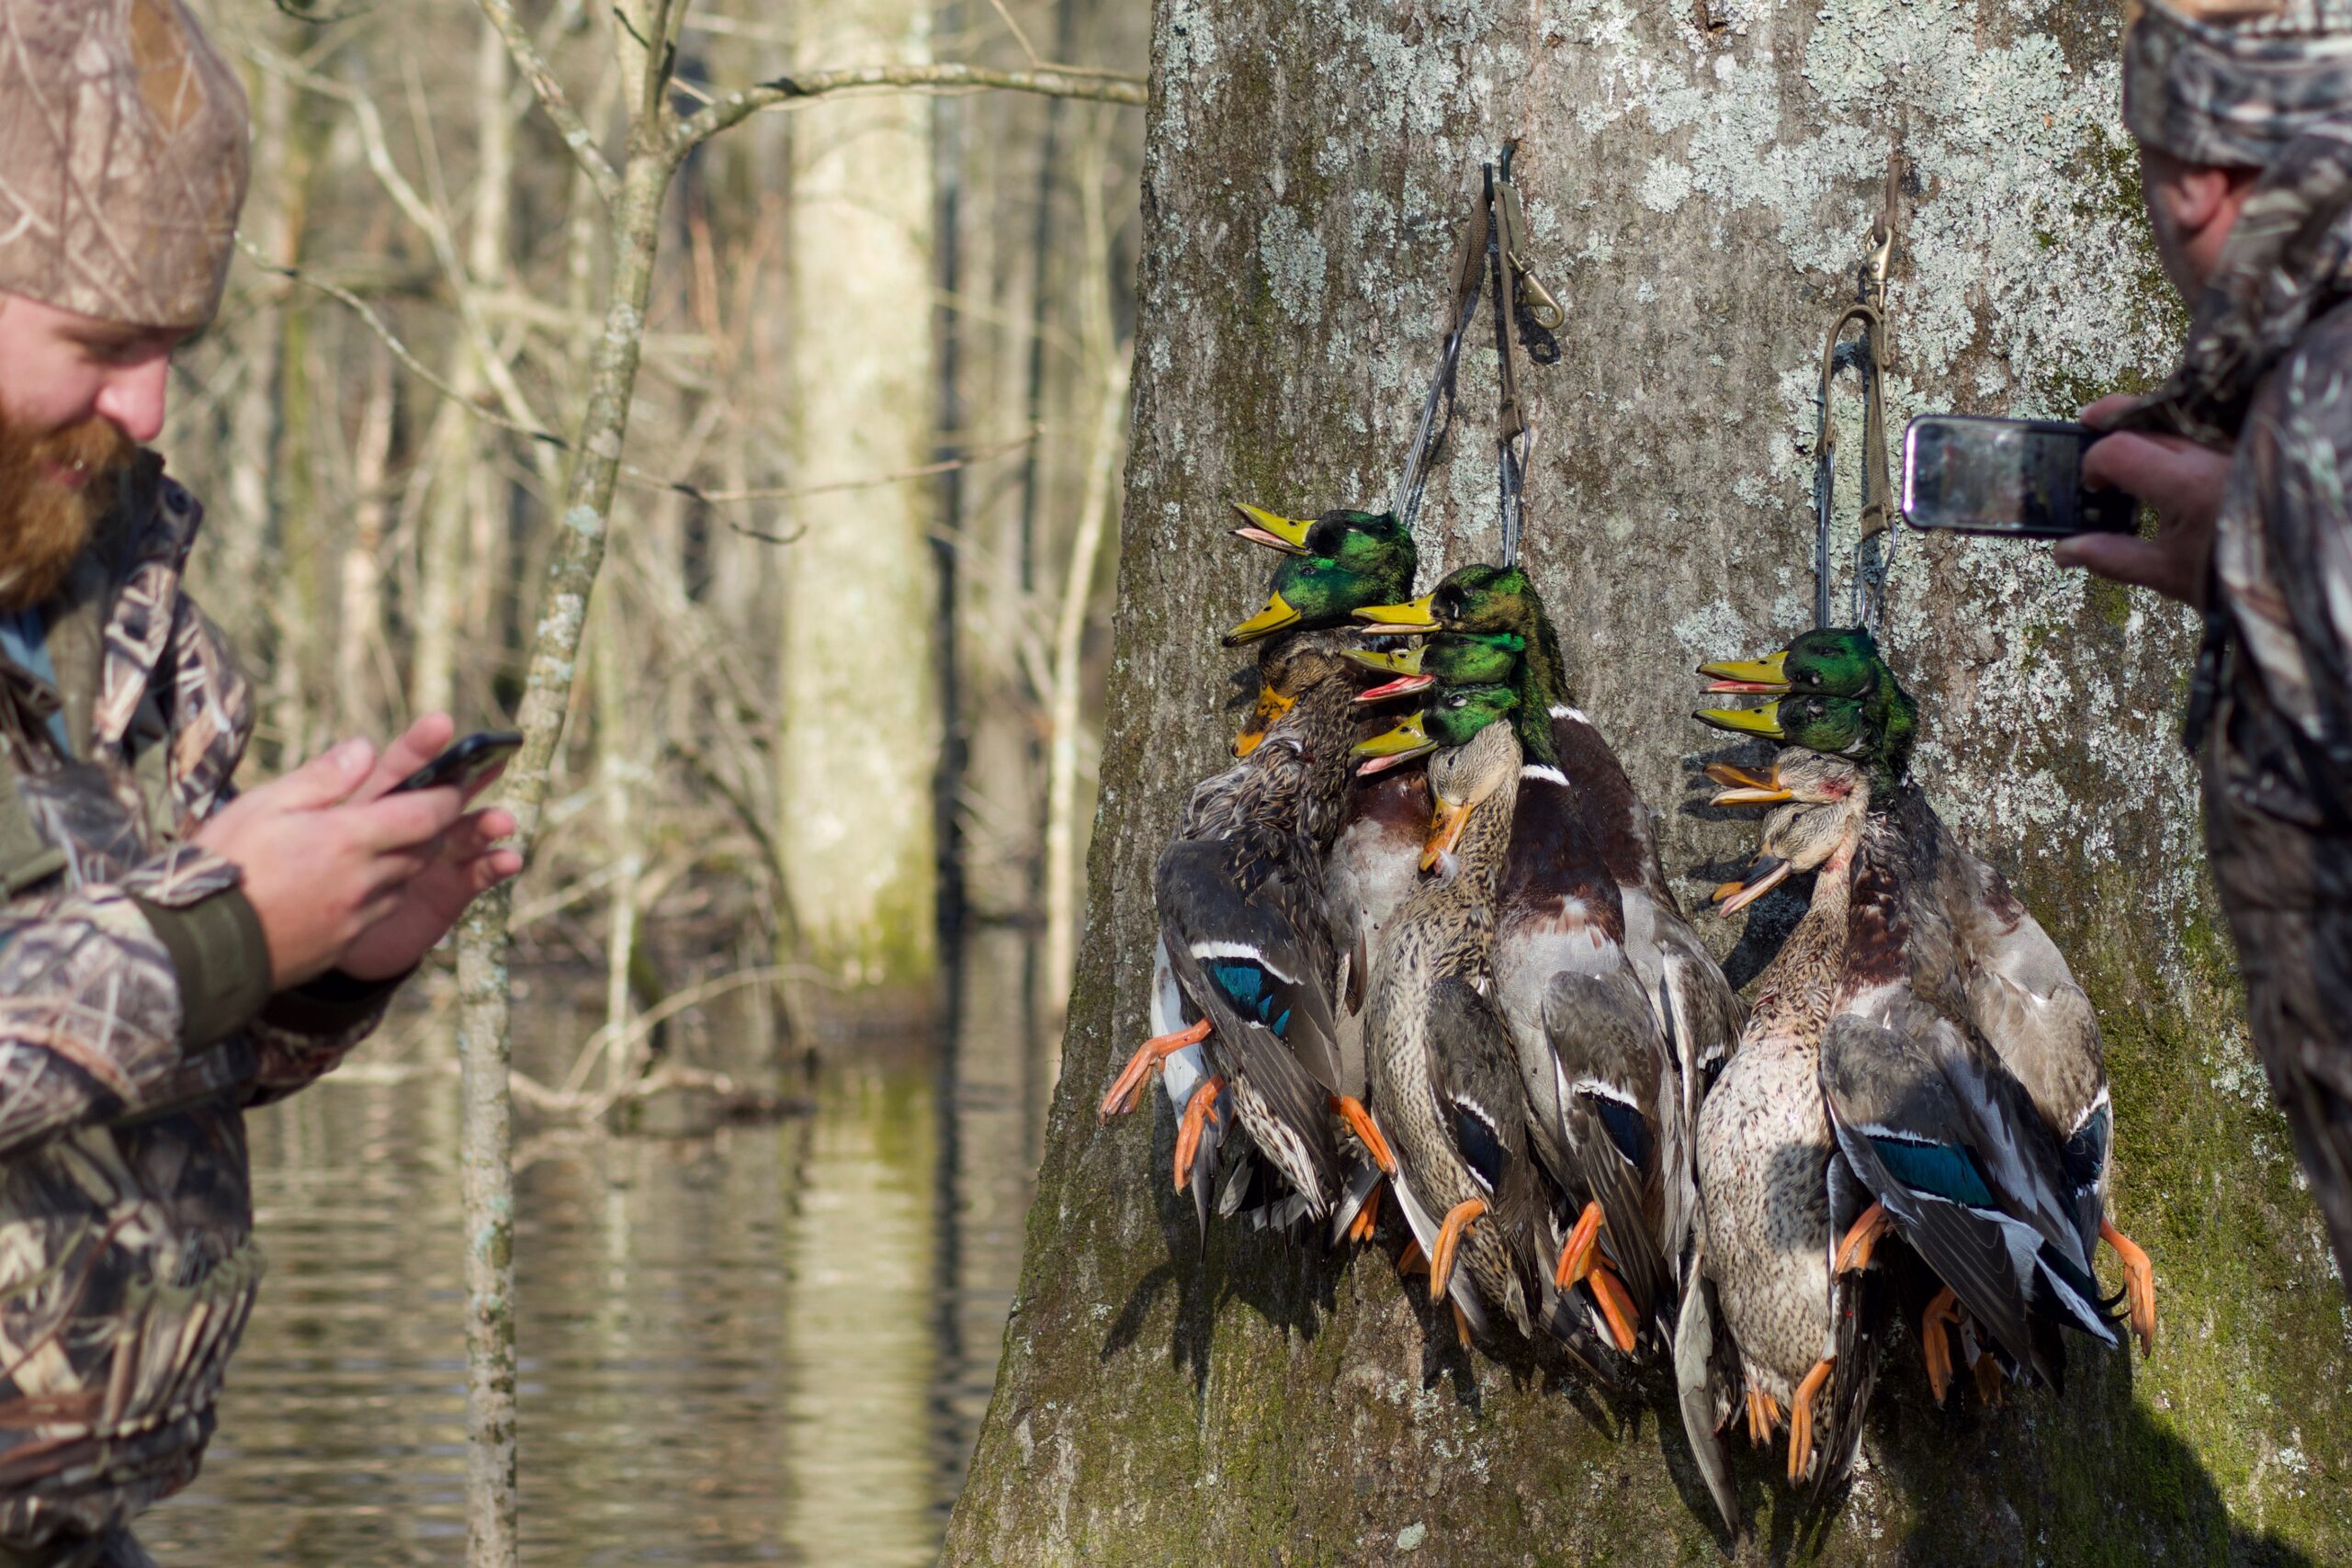 To have success hunting pressured ducks, you have to let them rest.